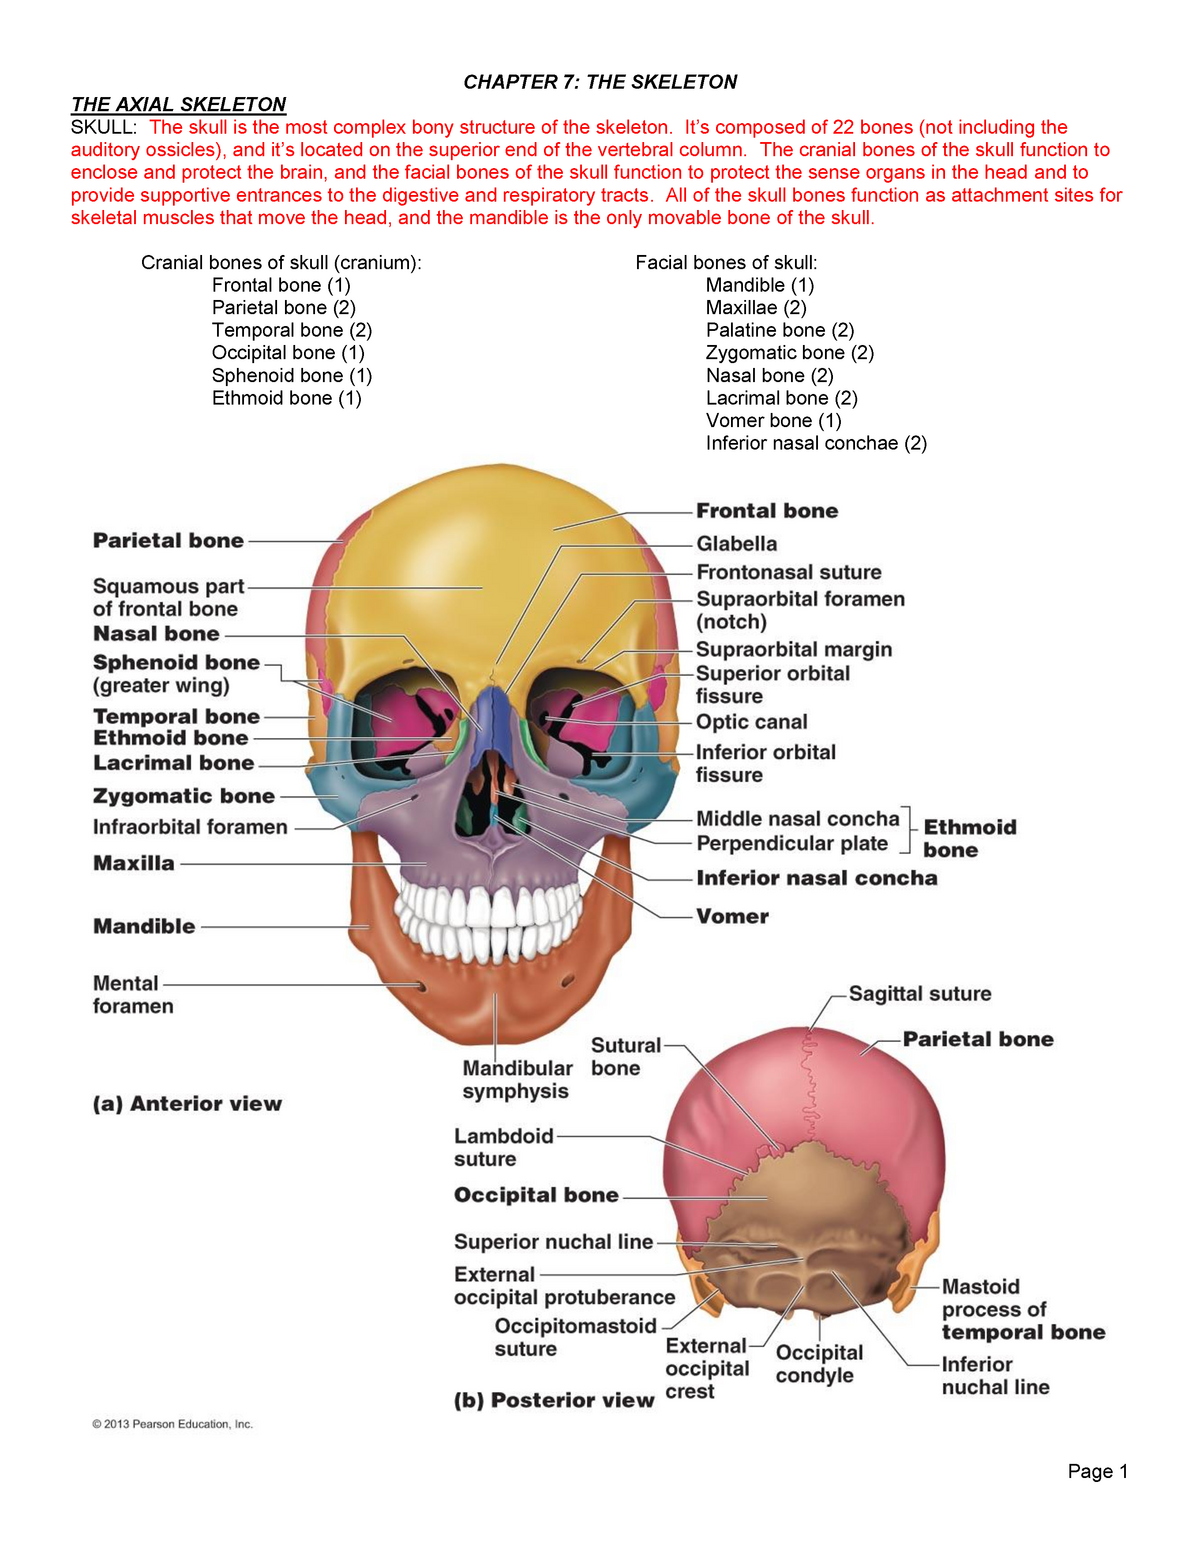 Ch. 7 Lecture Outline - CHAPTER 7: THE SKELETON THE AXIAL SKELETON ...